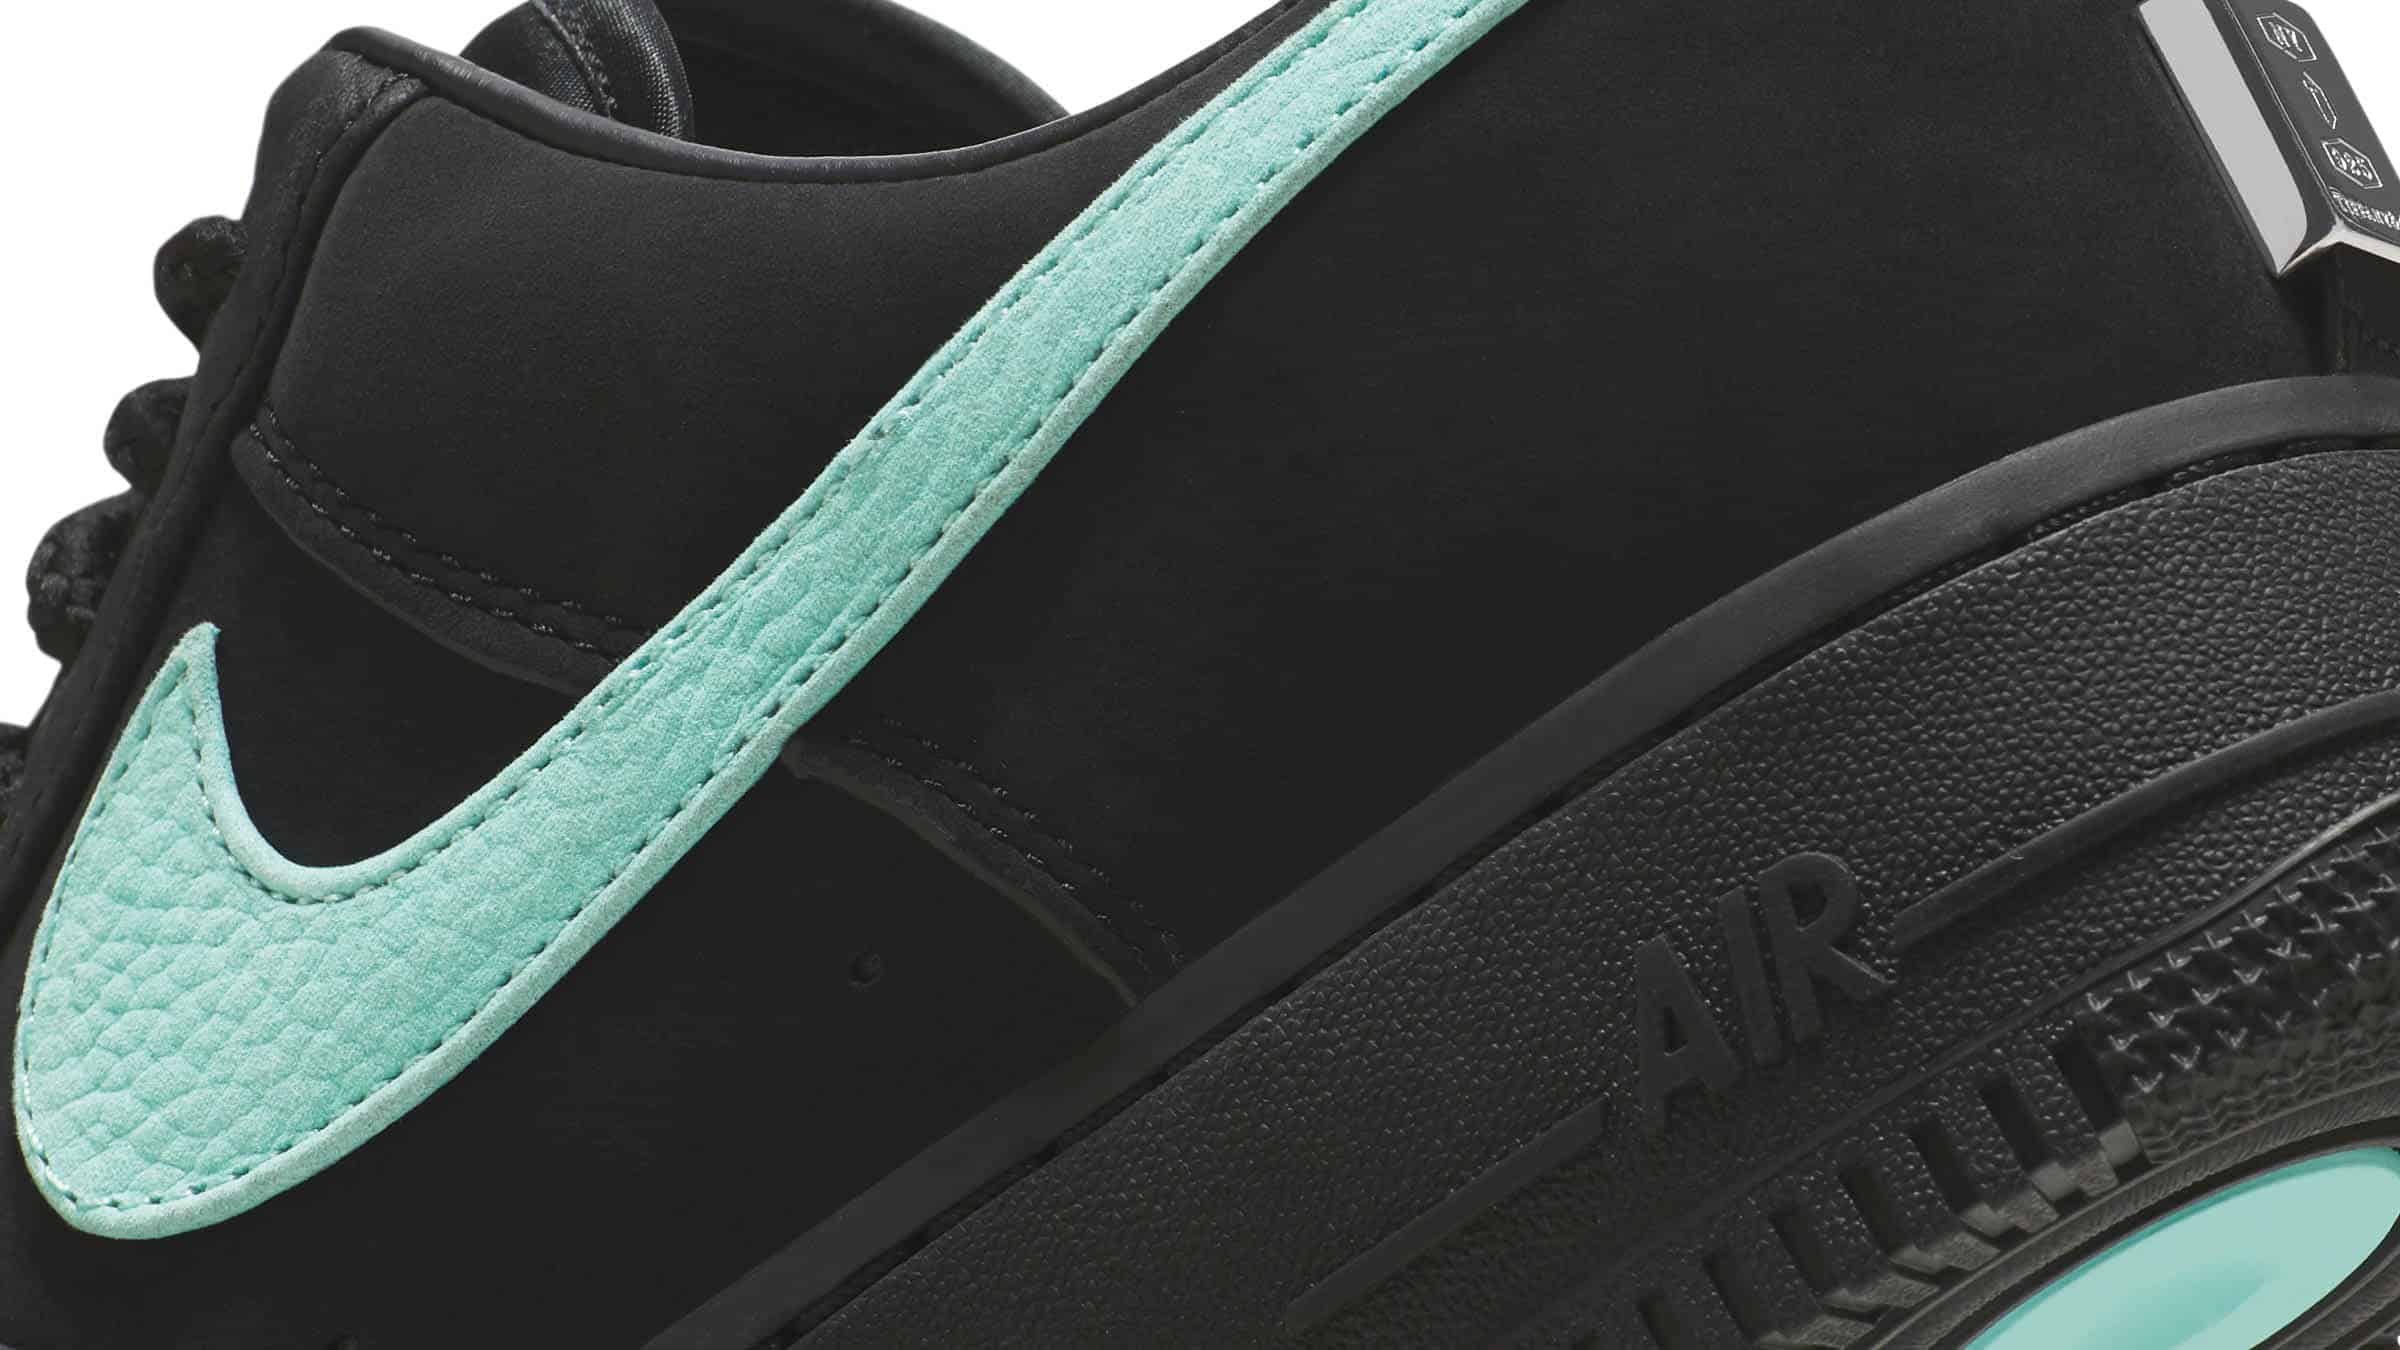 Tiffany & Co. x Nike collab: Everything we already know